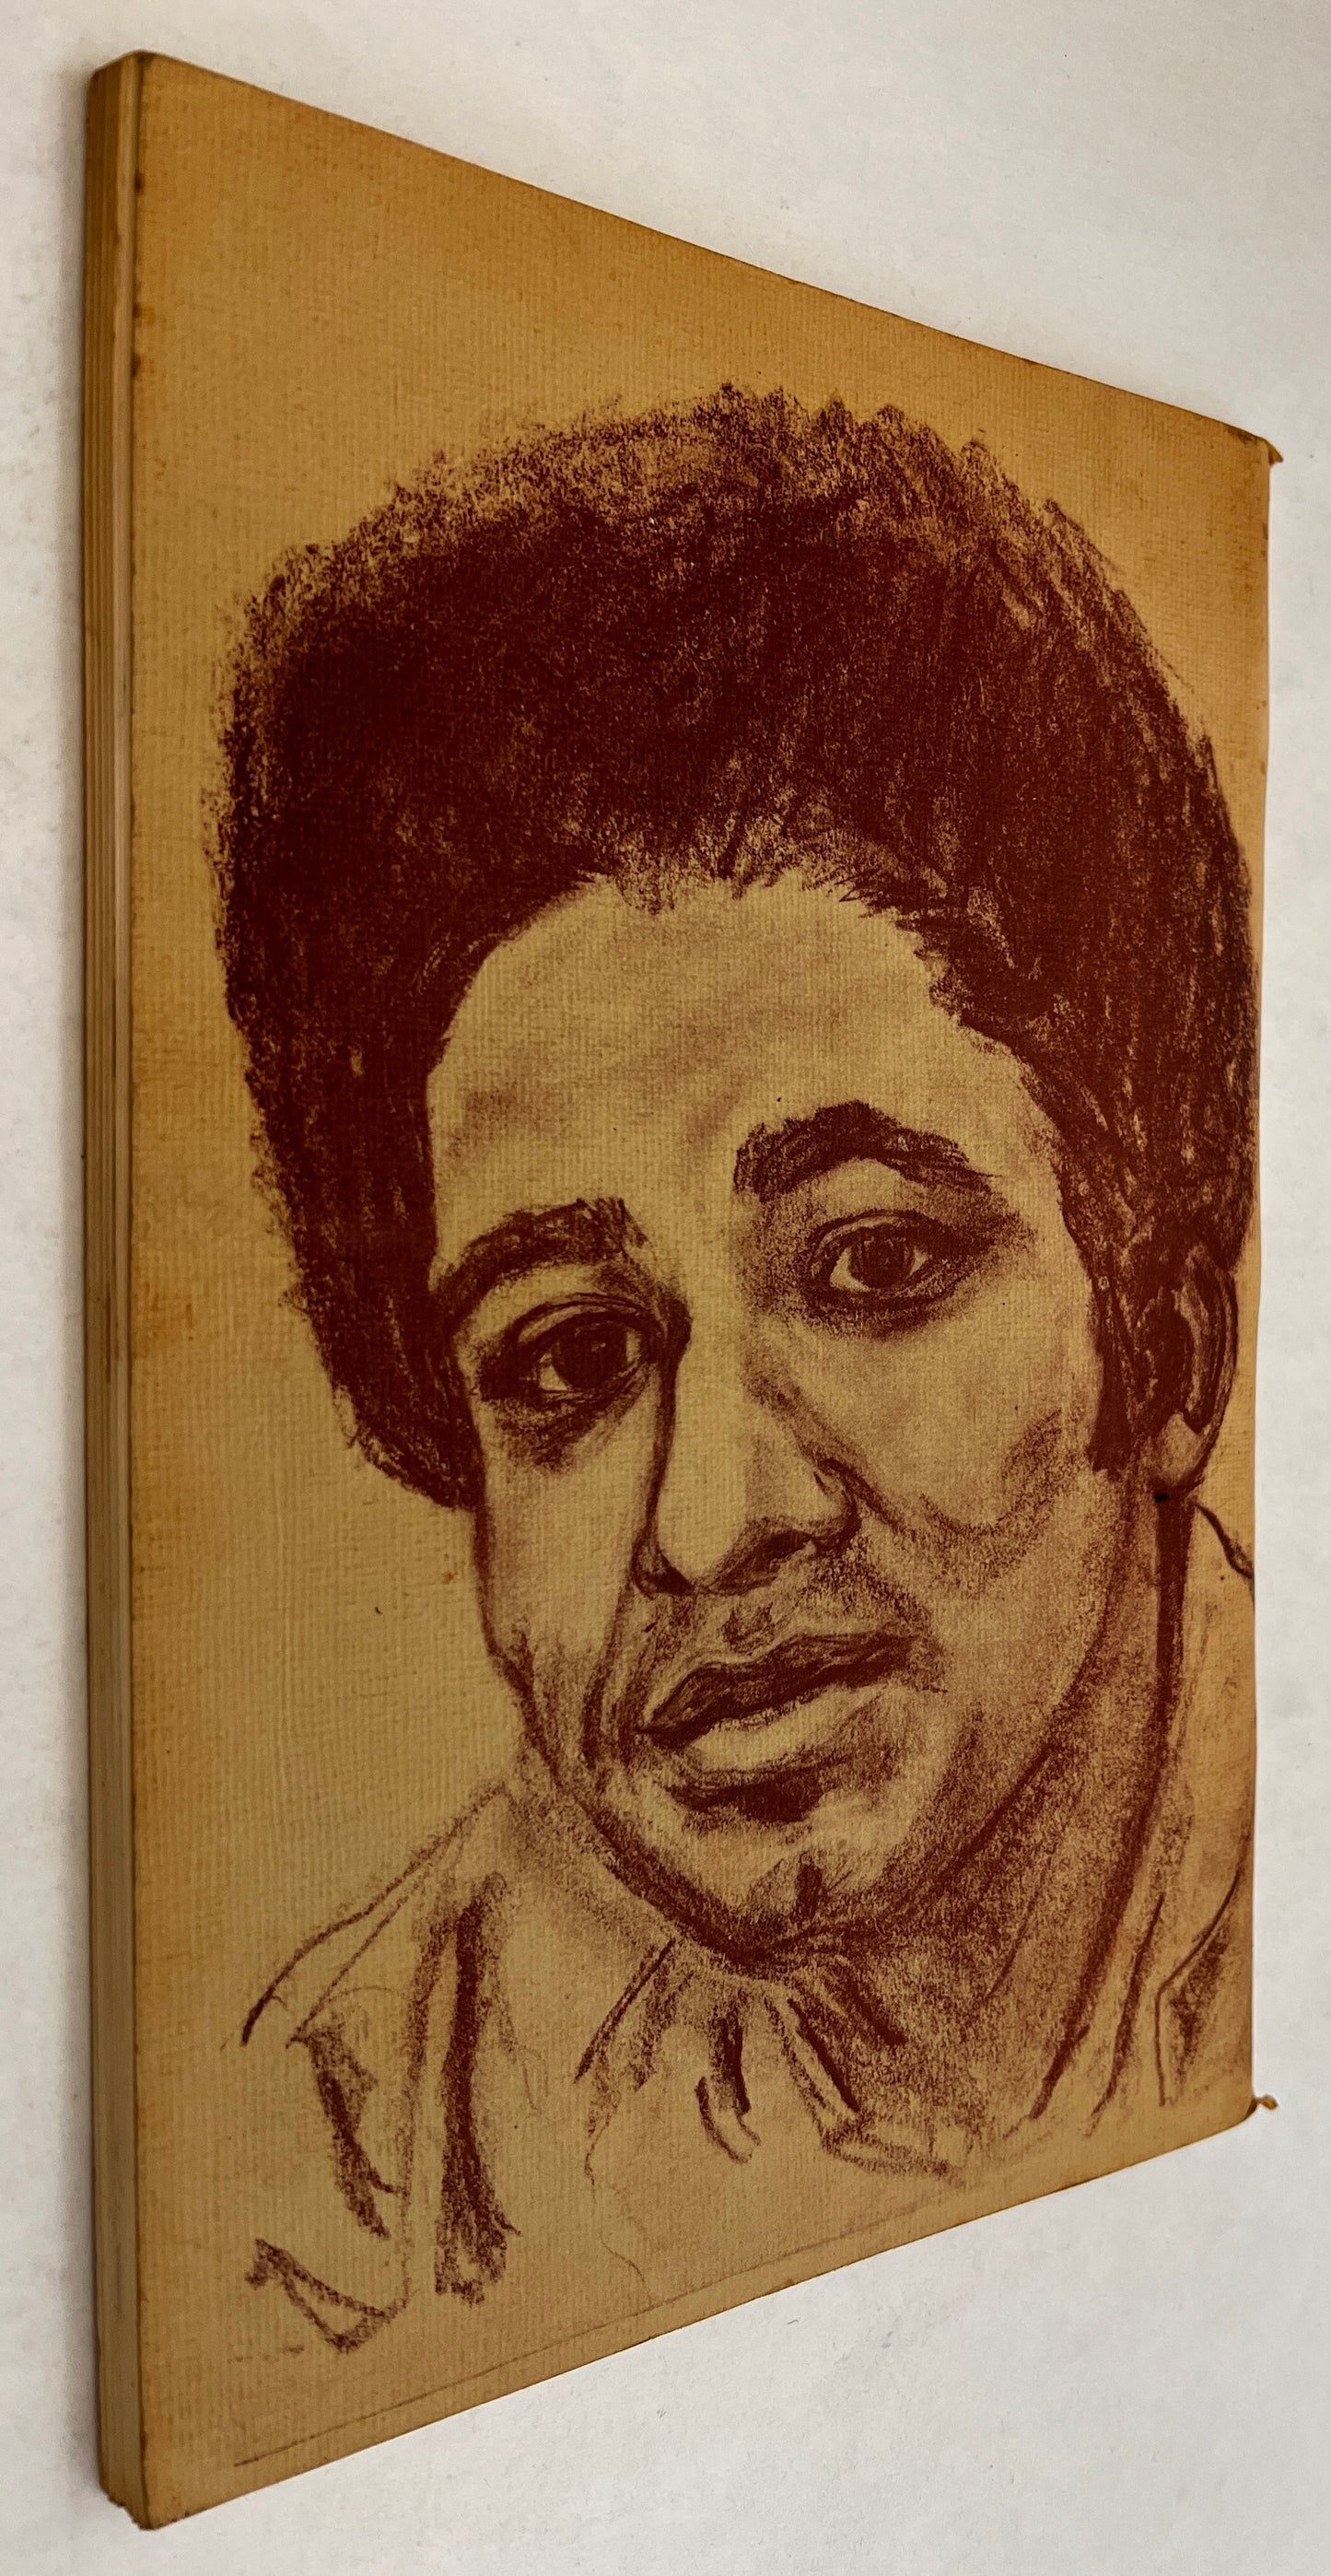 Comrade George: an Investigation Into the Life, Political Thought and Assassination of George Jackson